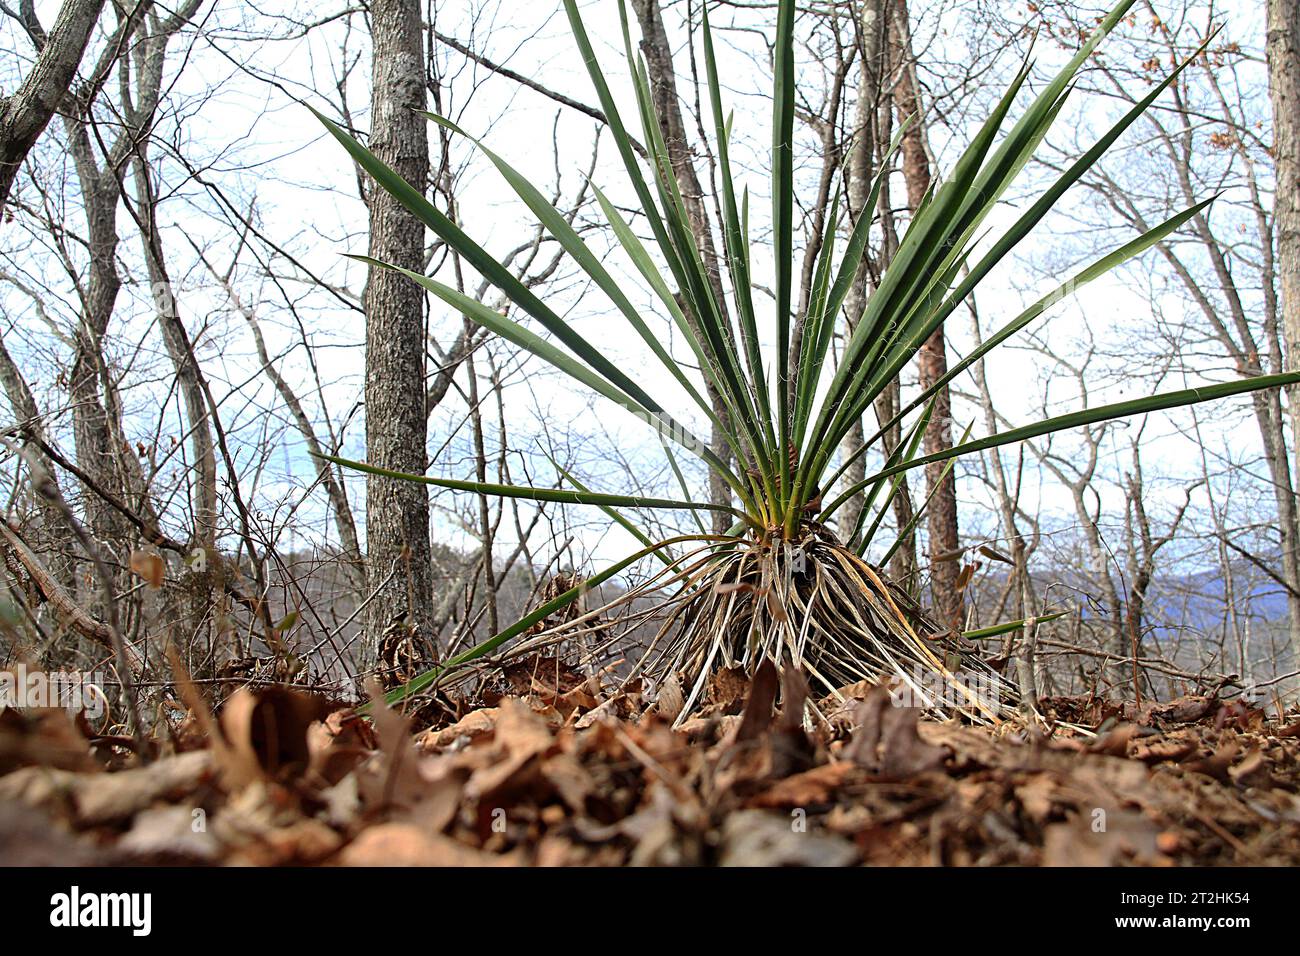 A Yucca plant growing in the woods in Virginia, USA Stock Photo